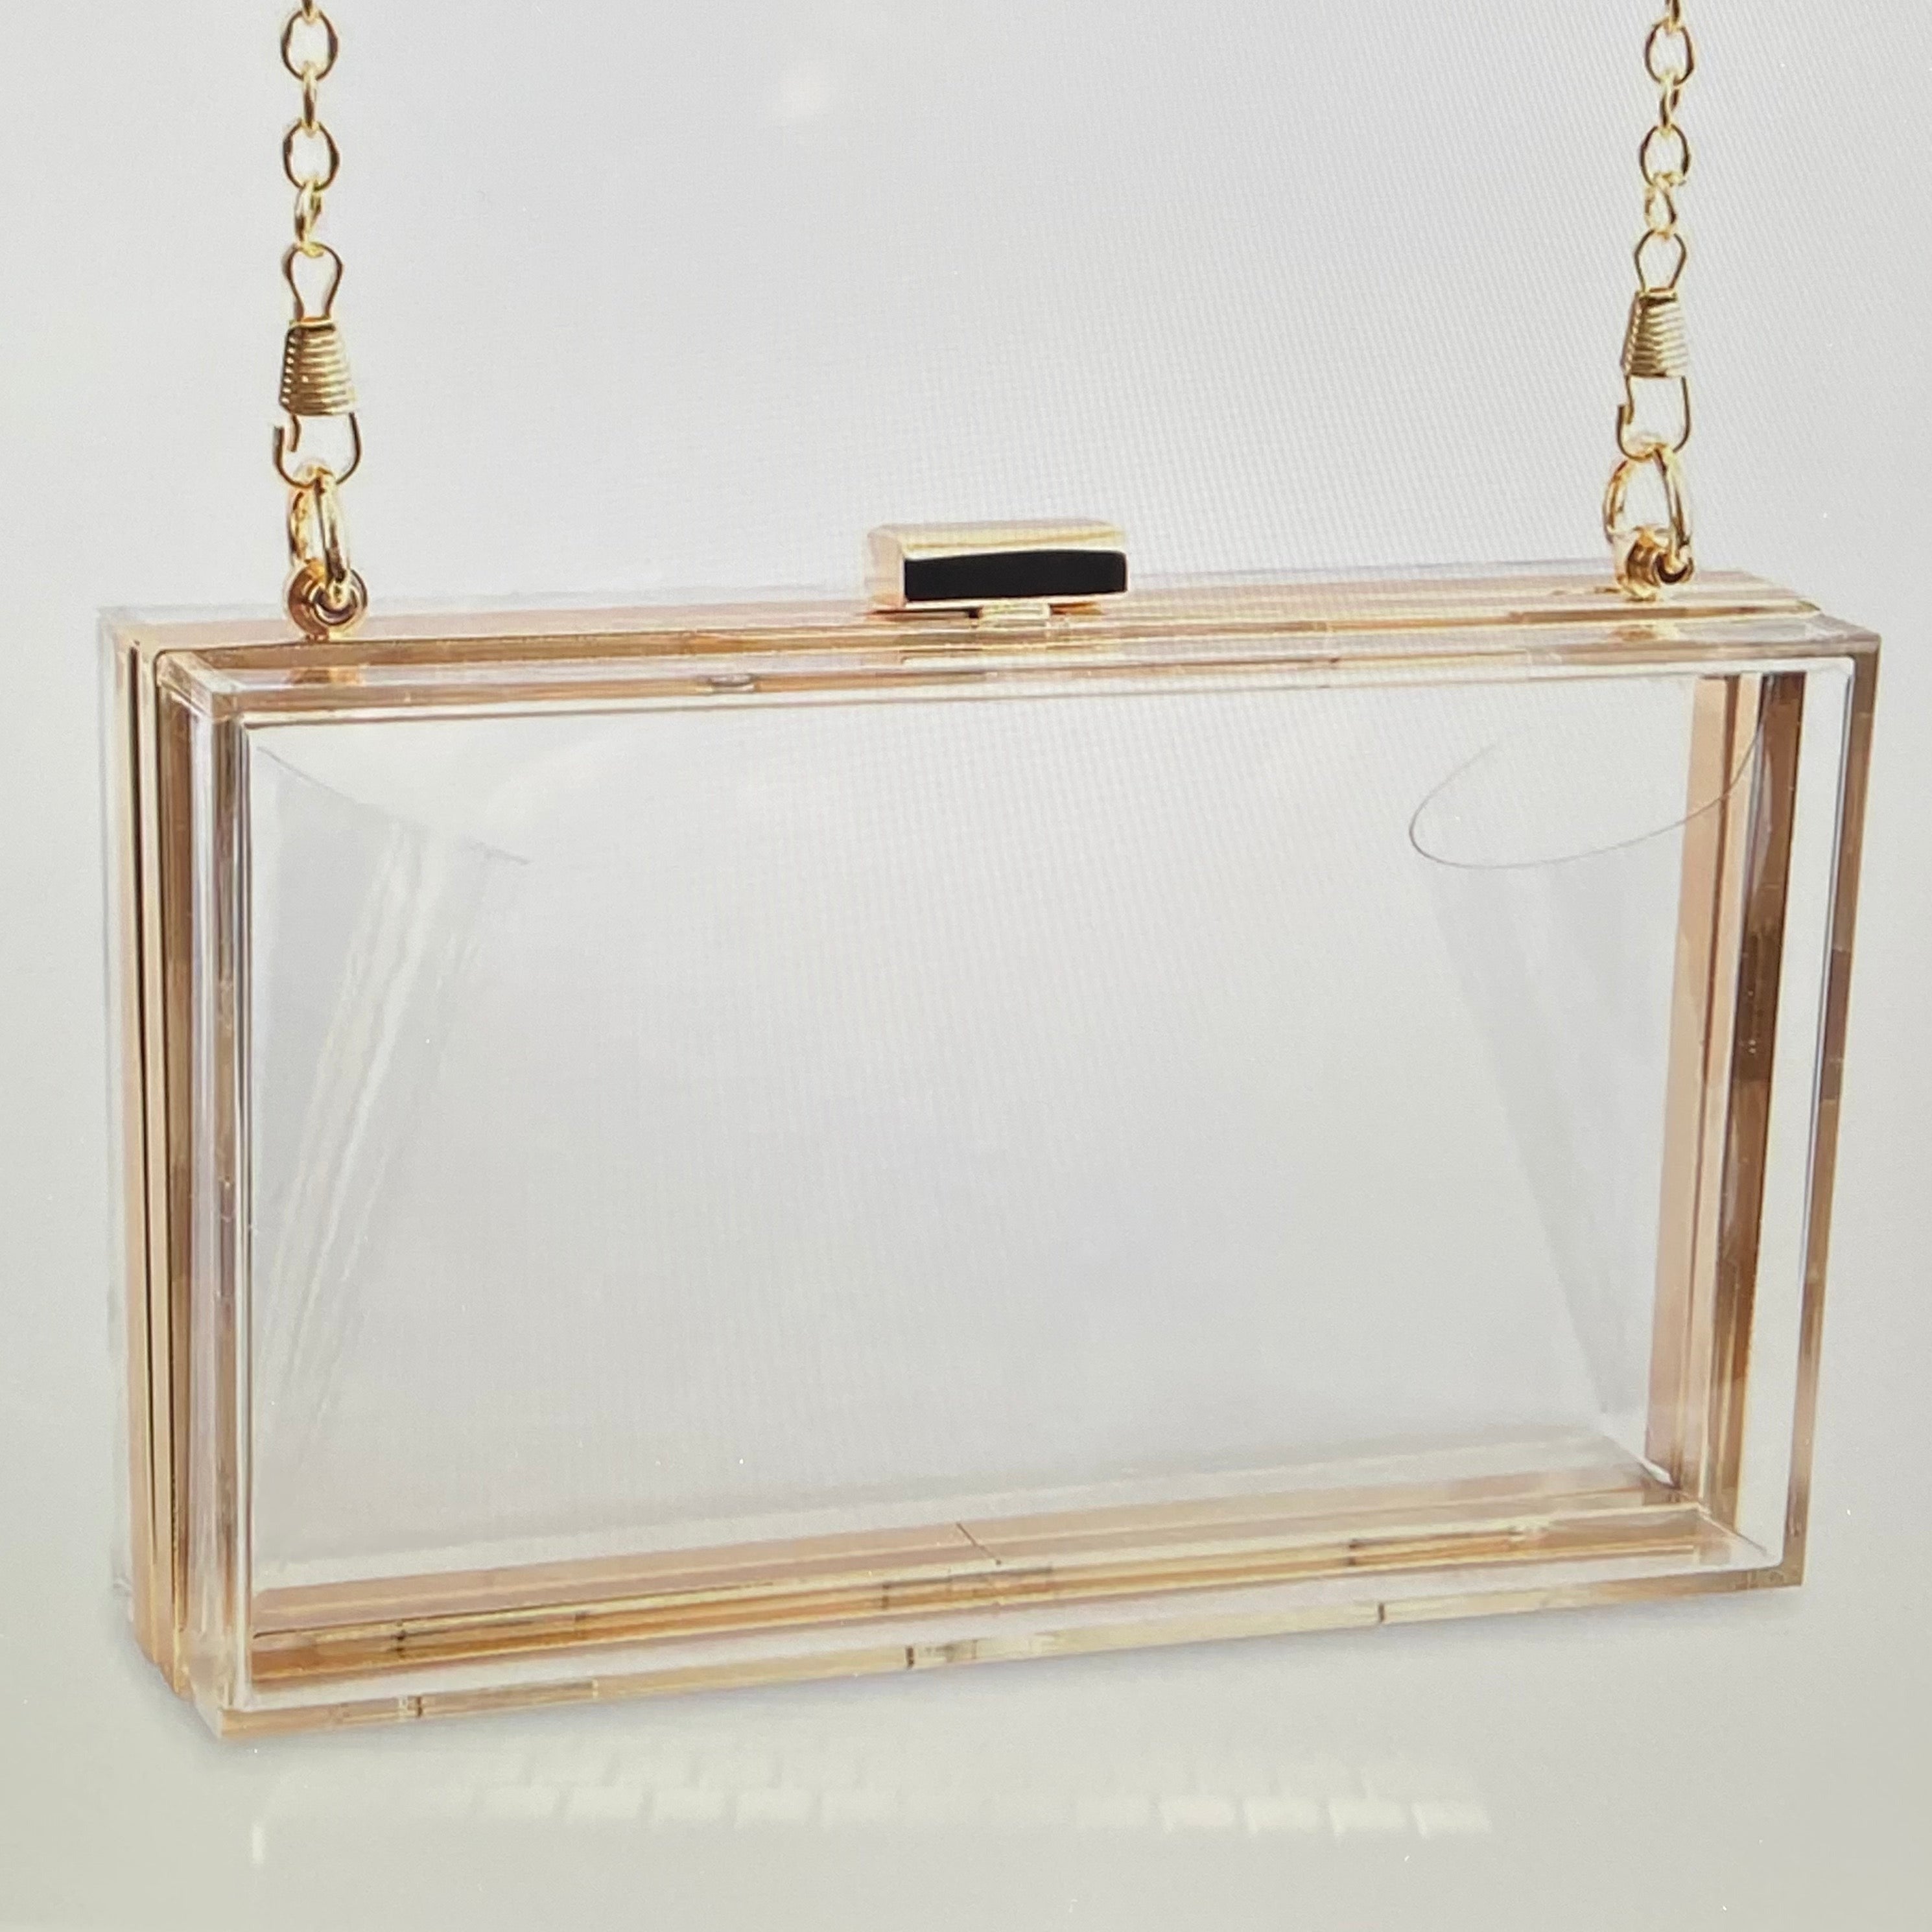 Chic Retro Acrylic Clutch Purse For Women Solid And Clear Design, Trendy  Round Hard The Lunch Box Design For Evening Events, Parties, And Proms From  Saxg875, $44.98 | DHgate.Com